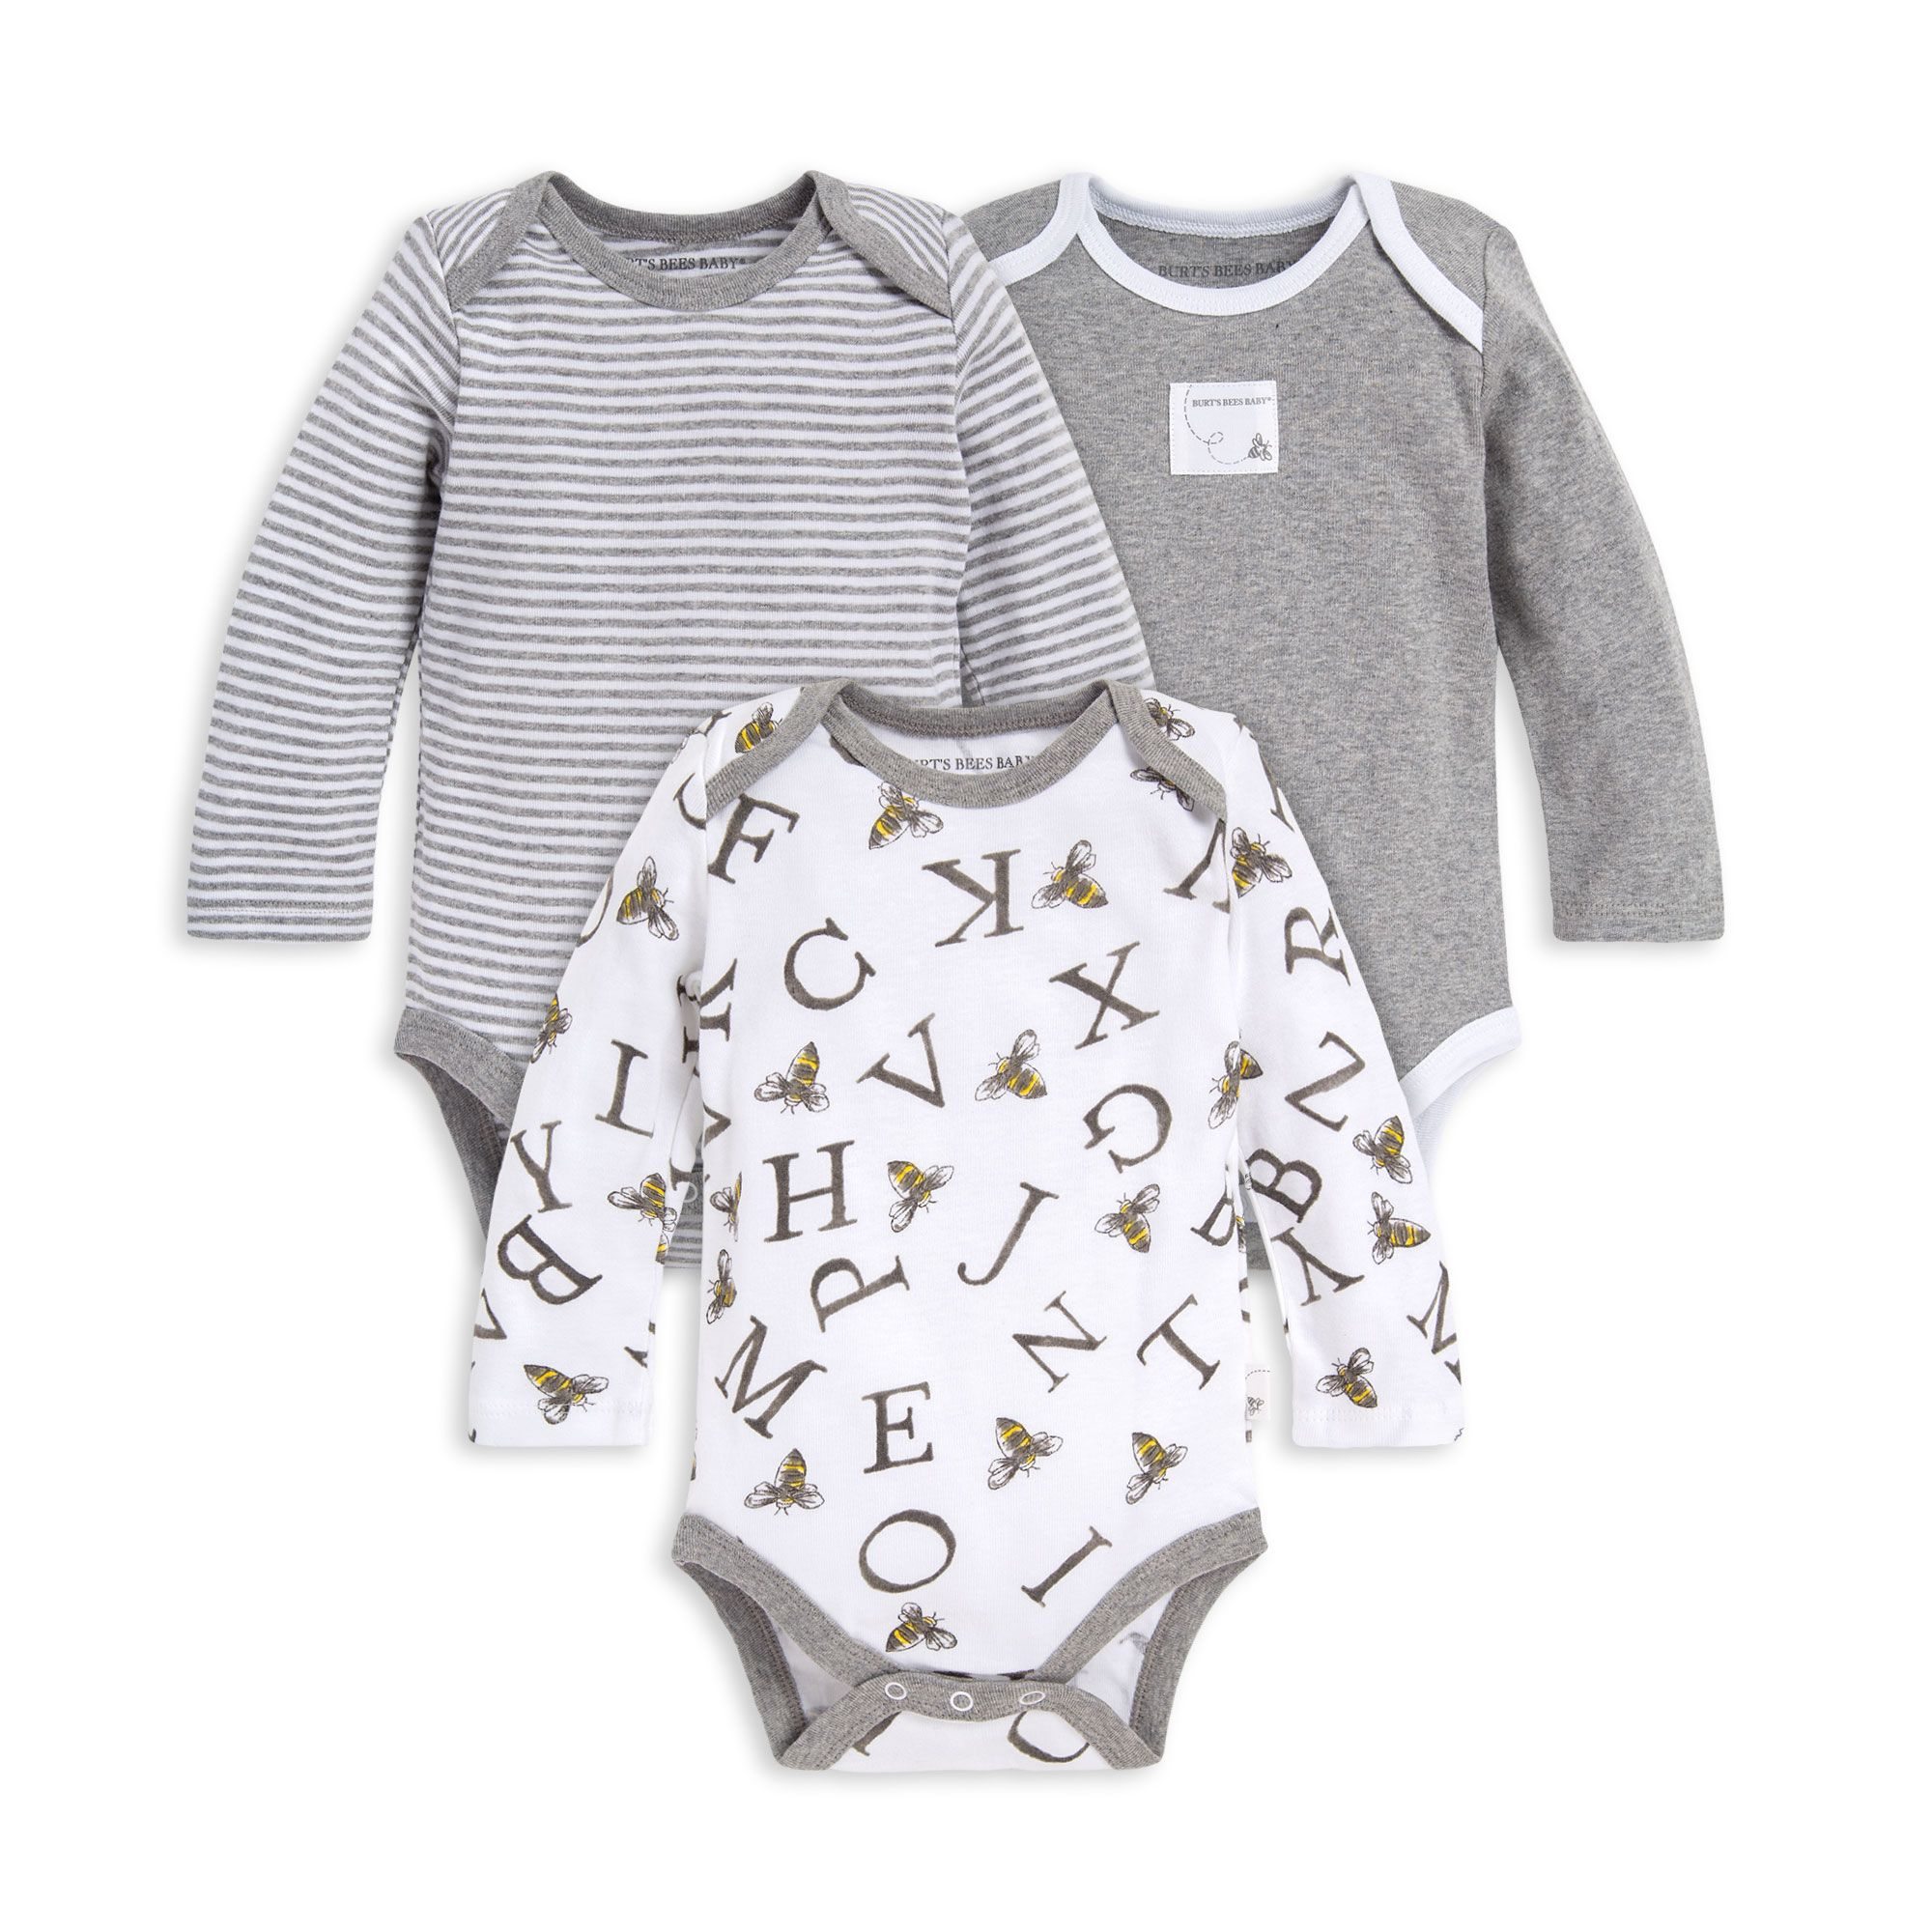 A-Bee-C Organic Baby 3 Pack Long Sleeve Bodysuits